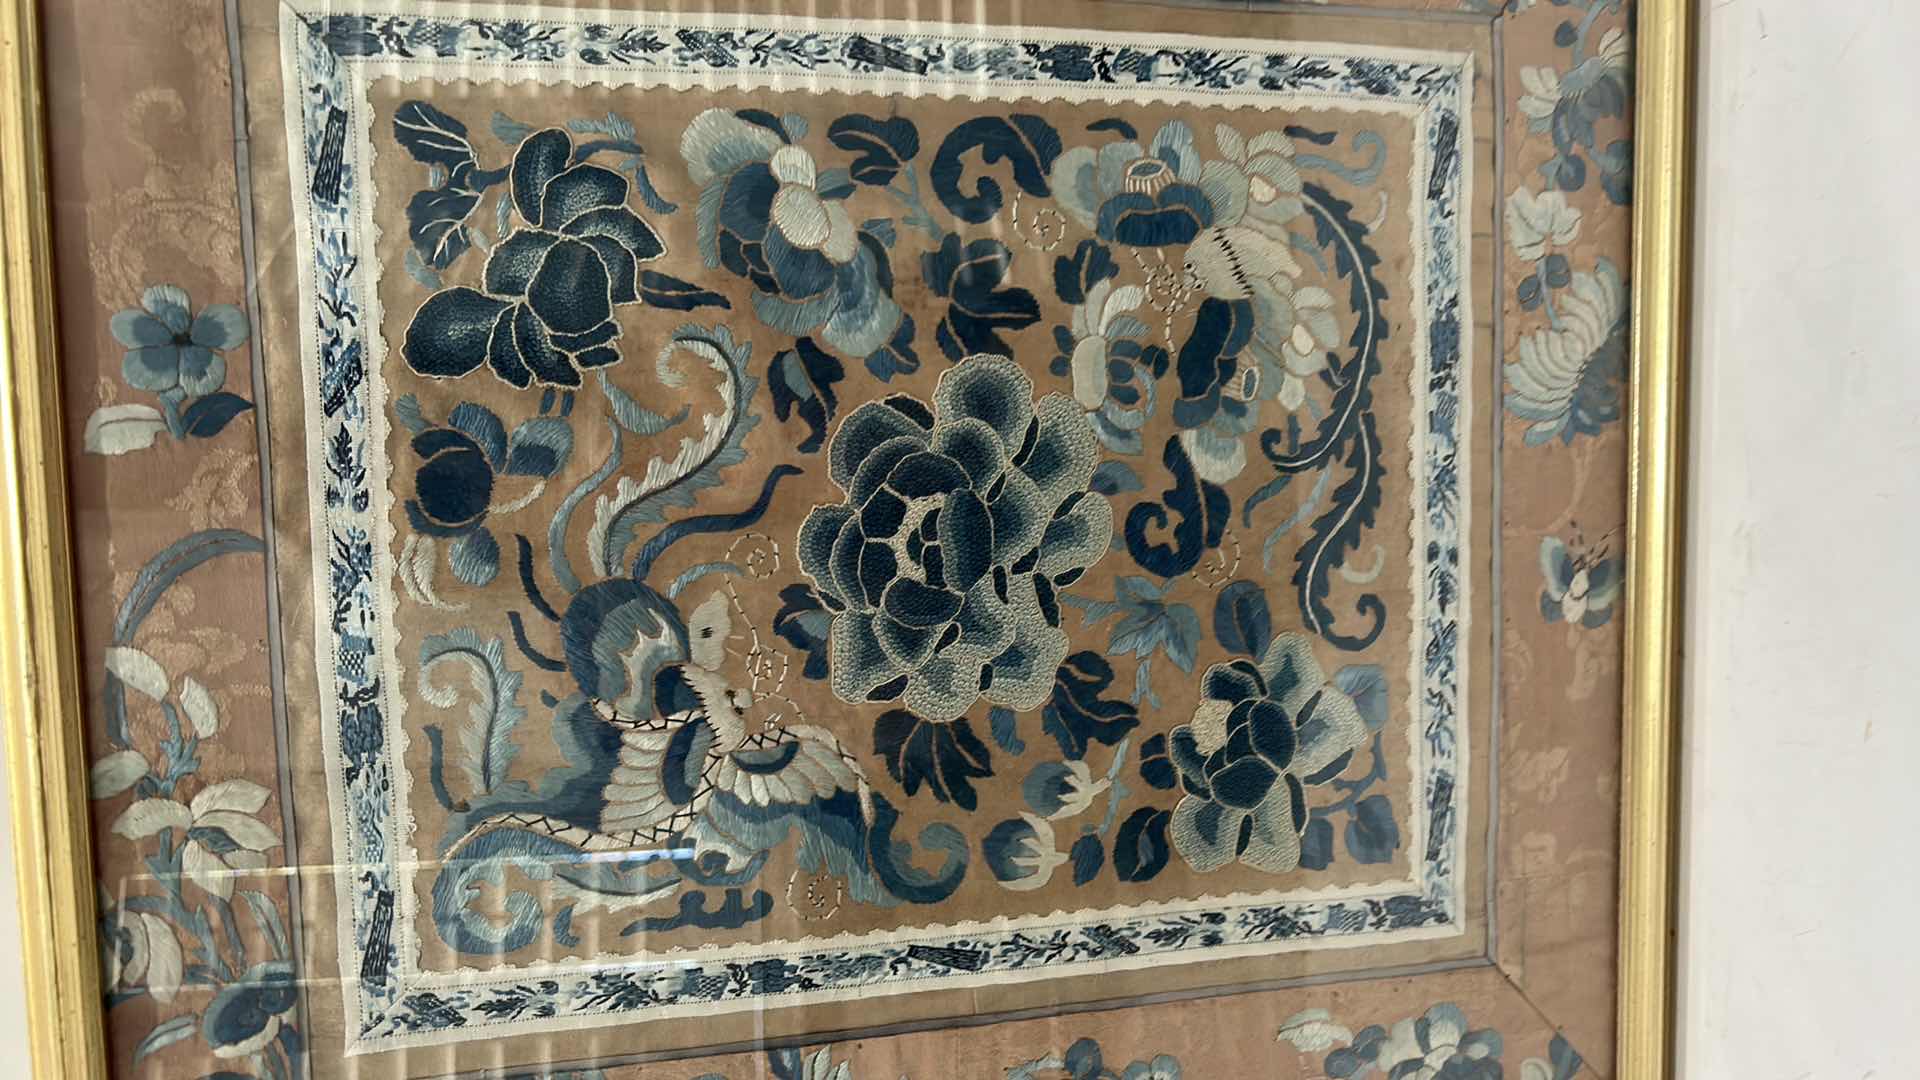 Photo 3 of ANTIQUE CHINESE TEXTILE FABRIC, SILK WITH SILK THREAD HAND EMBROIDERY ARTWORK FRAMED14 1/2” x 17” 16 1/2” x 18 1/2”